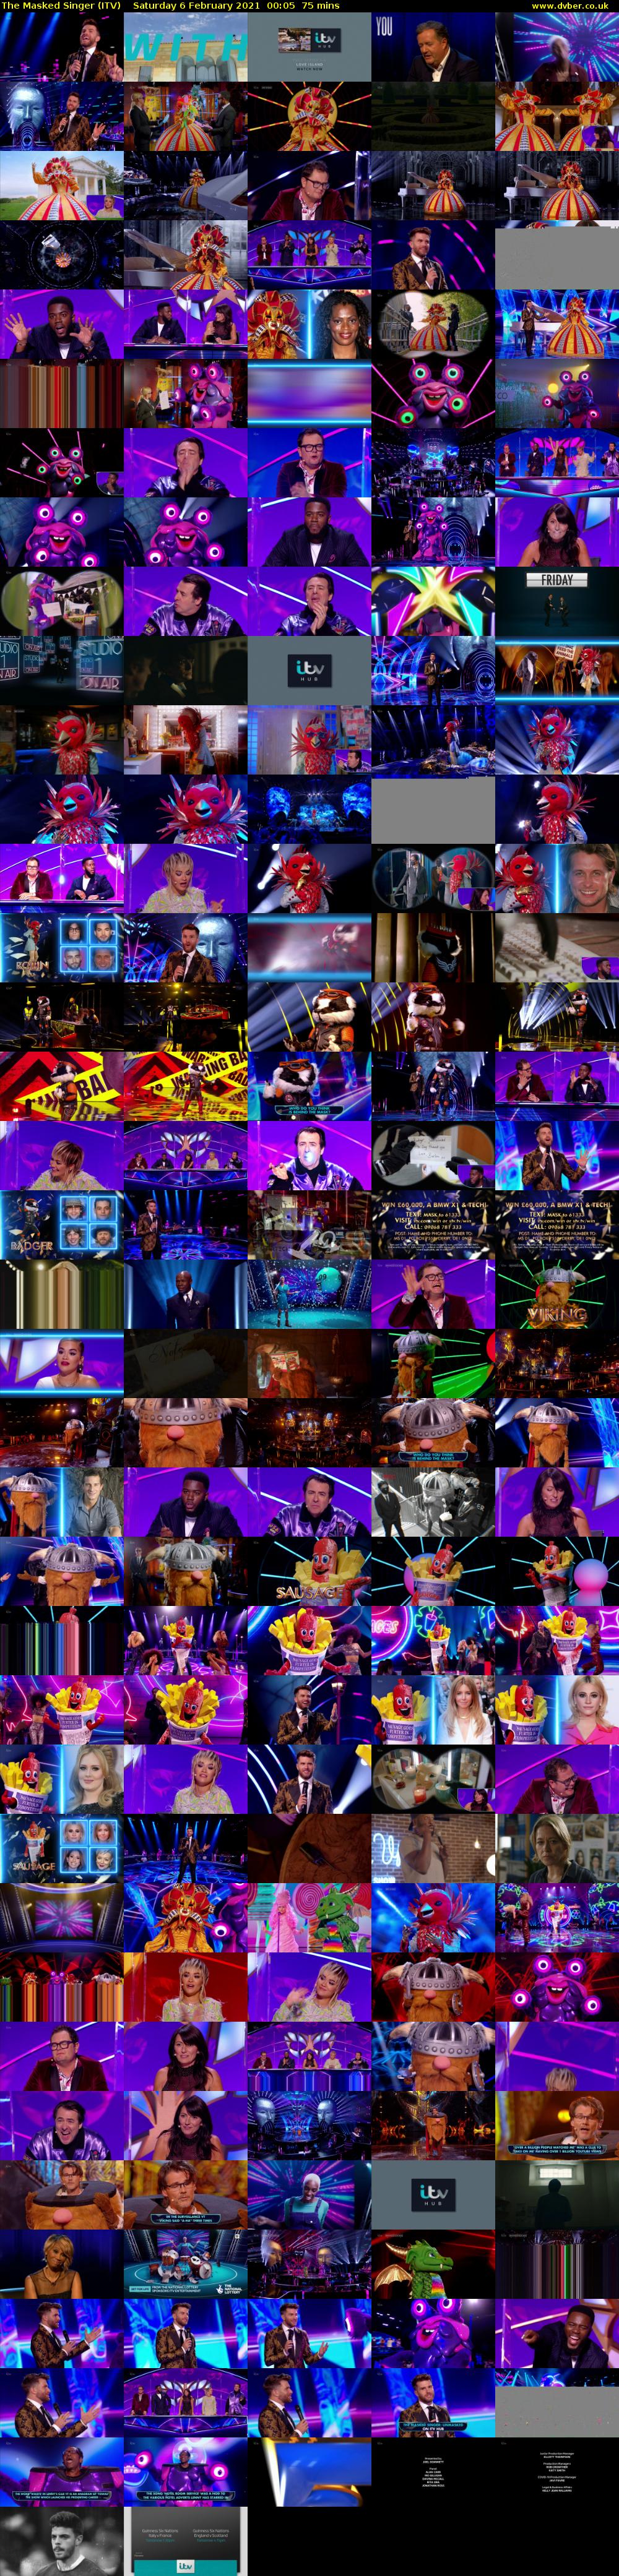 The Masked Singer (ITV) Saturday 6 February 2021 00:05 - 01:20